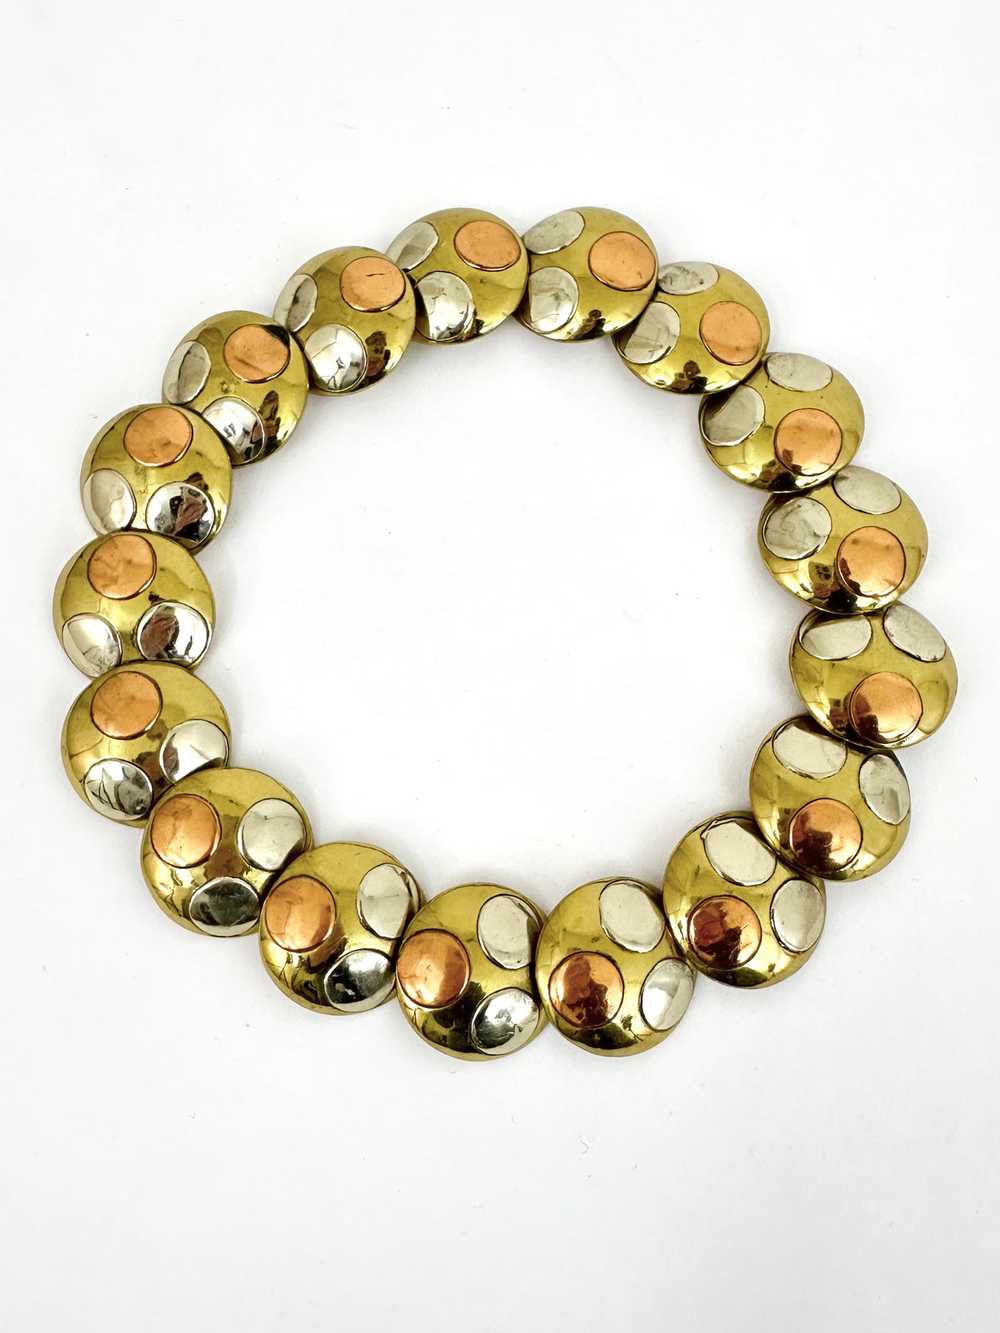 80s Italian Couture Brass Collar Necklace - image 2